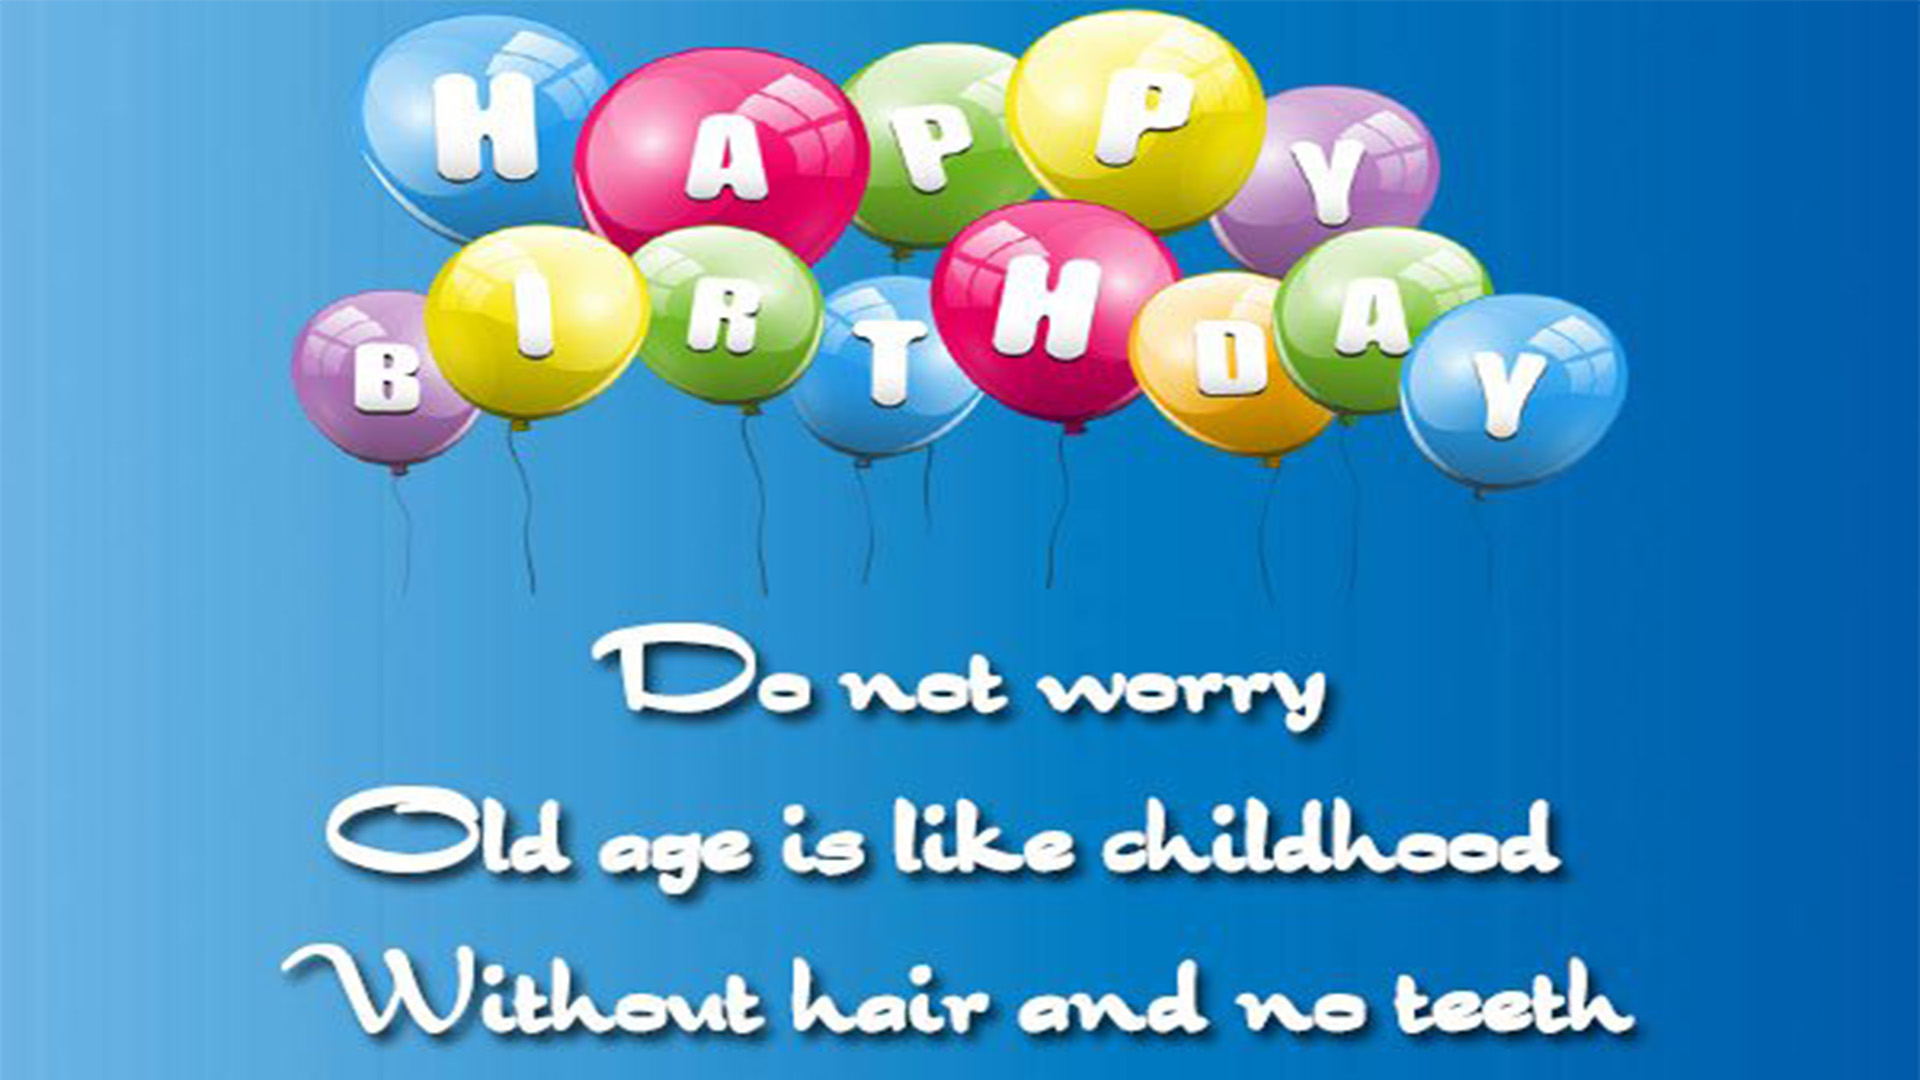 funny birthday wishes image